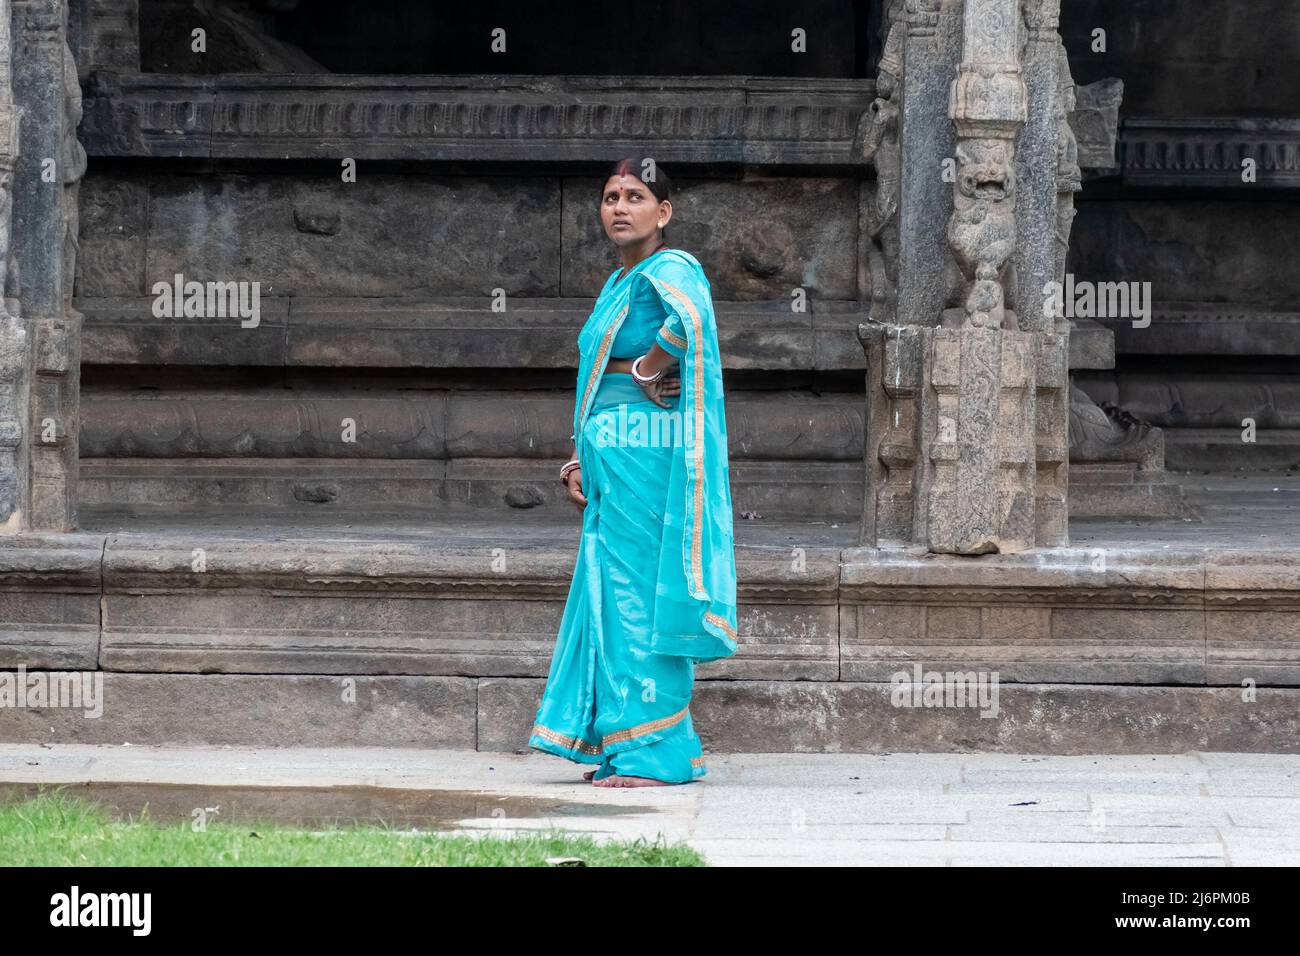 Vellore, Tamil Nadu, India - Septermber 2018: An Indian woman wearing a bright blue sari standing outside and staring at the walls of a temple in the Stock Photo